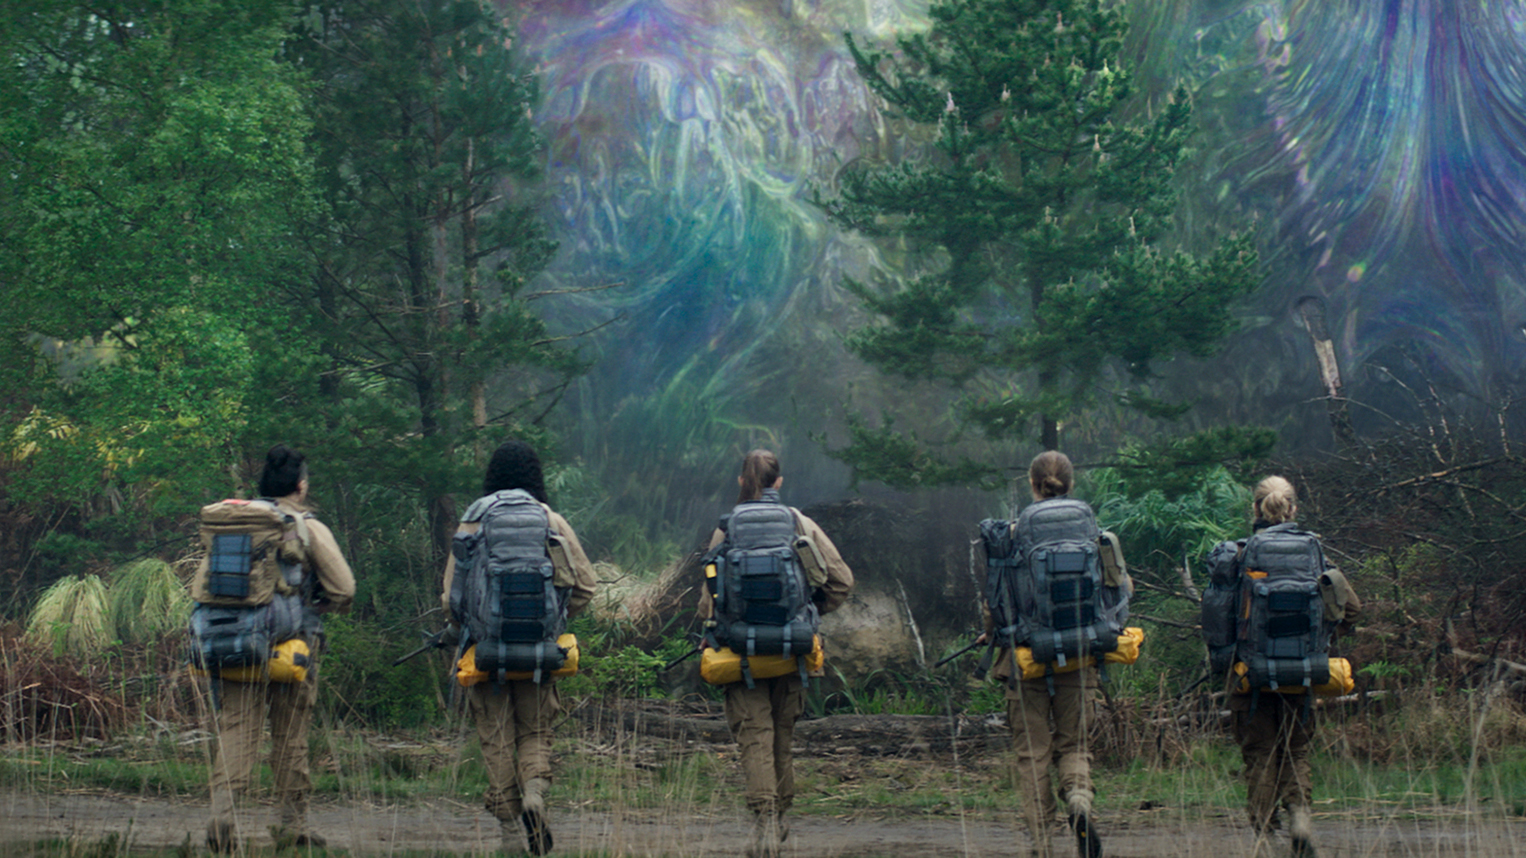 A still from the movie Annihilation in which a group of female scientists walk towards a shimmering forest.